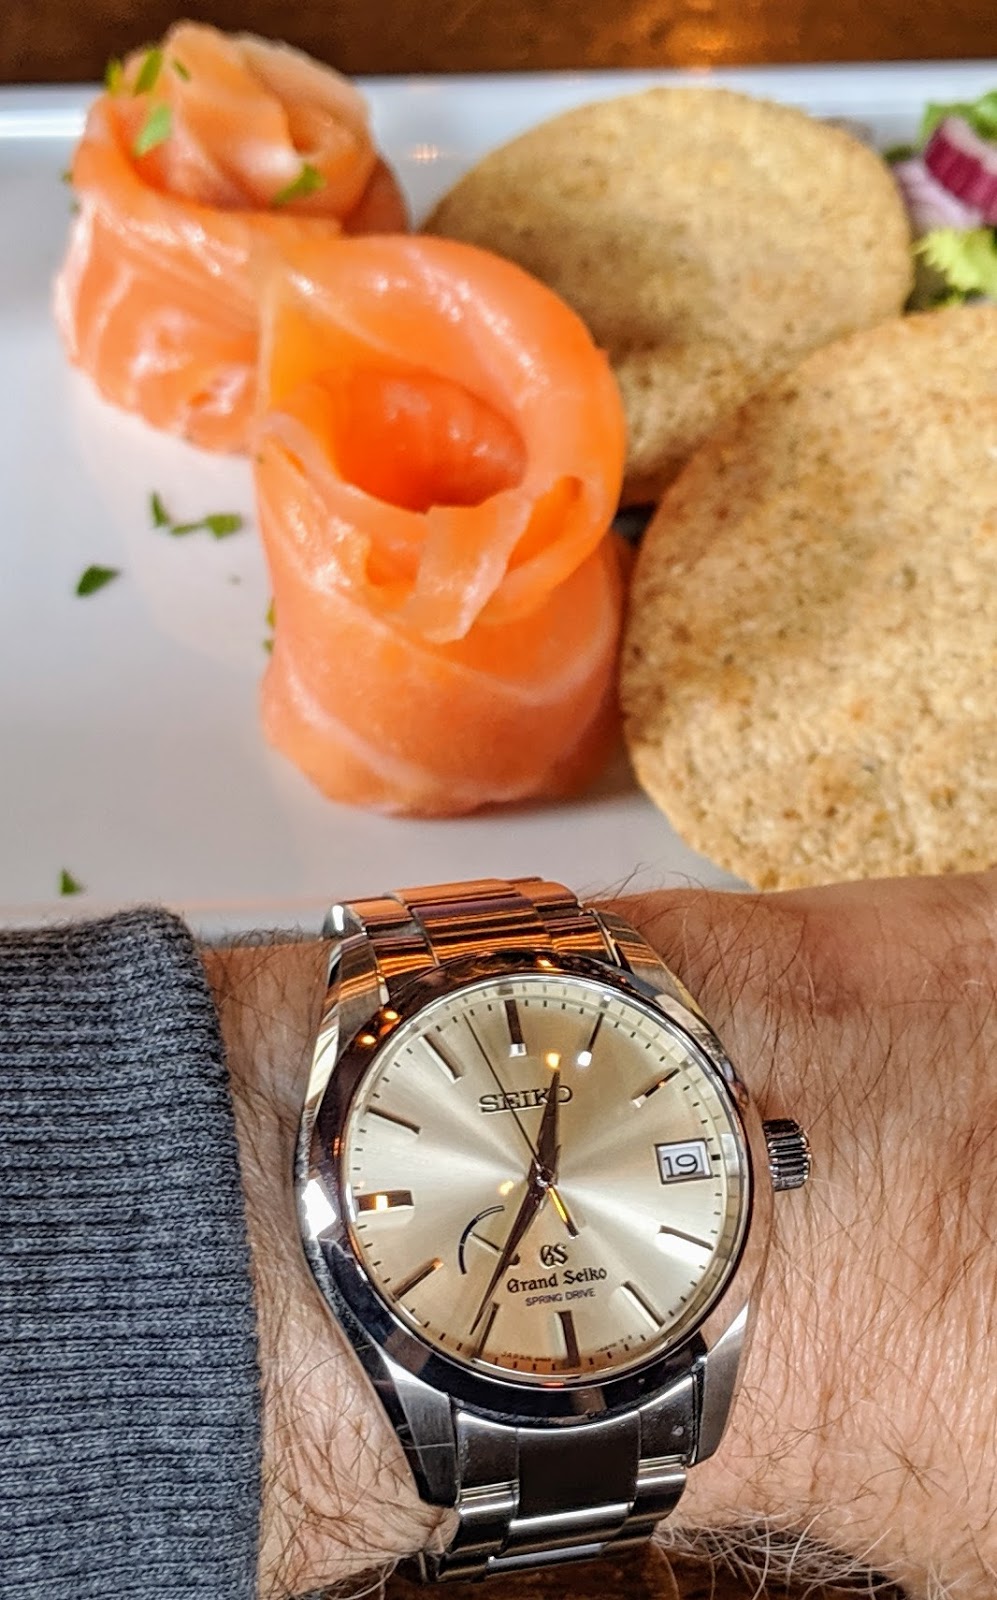 A Better Wrist: Champagne and Salmon: A Grand Seiko Spring Drive Story in  Pictures